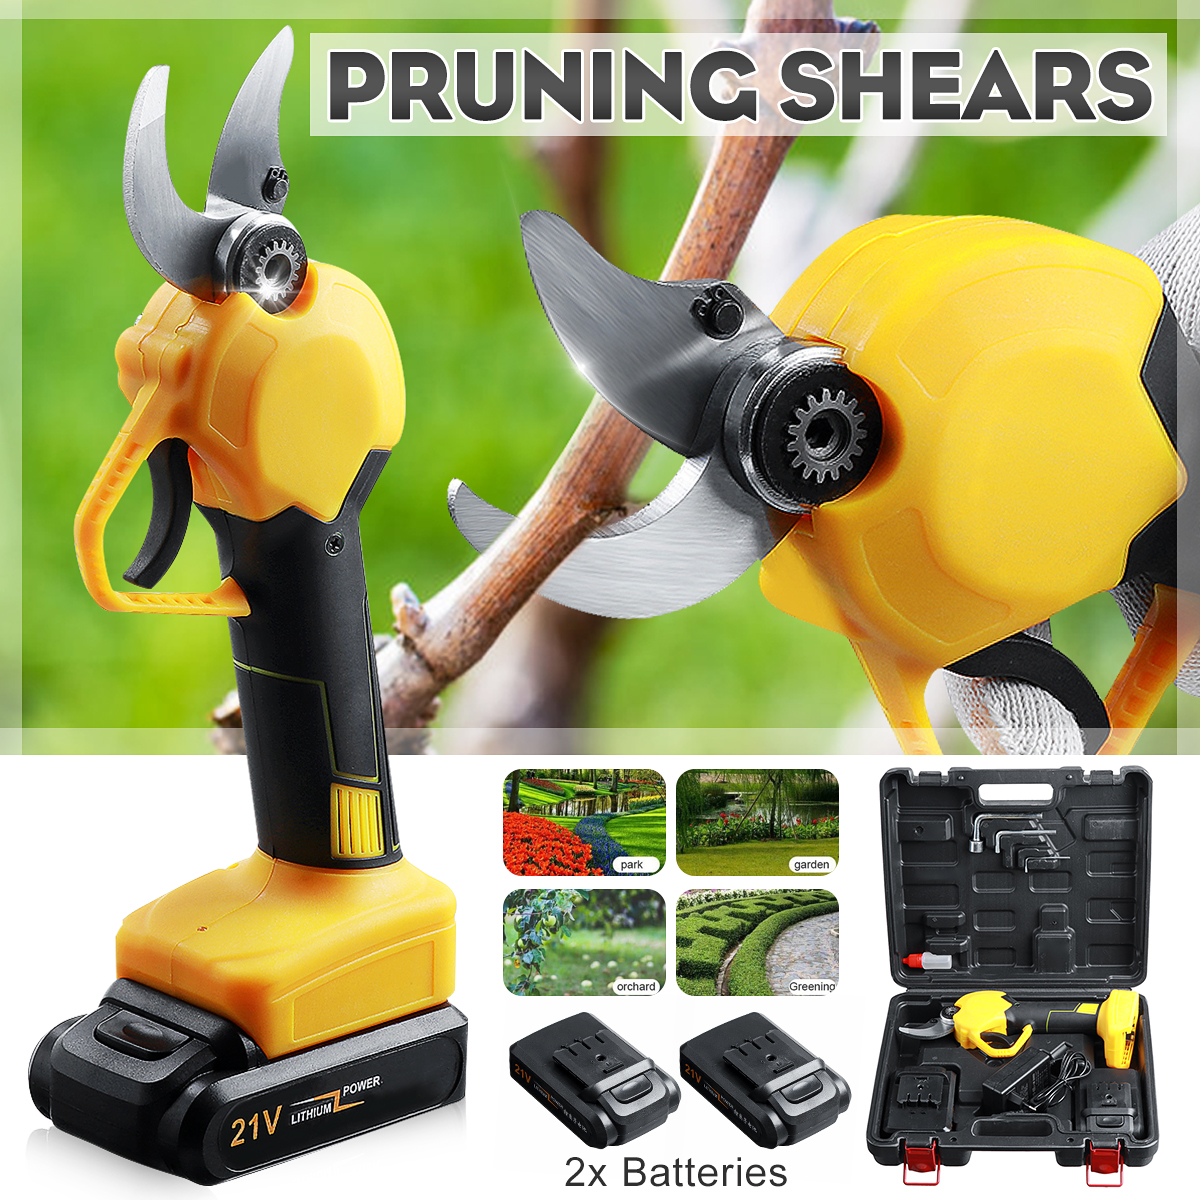 21V-30mm-Cordless-Electric-Pruning-Shears-Scissors-Rechargeable-Li-on-Battery-Garden-1803100-1